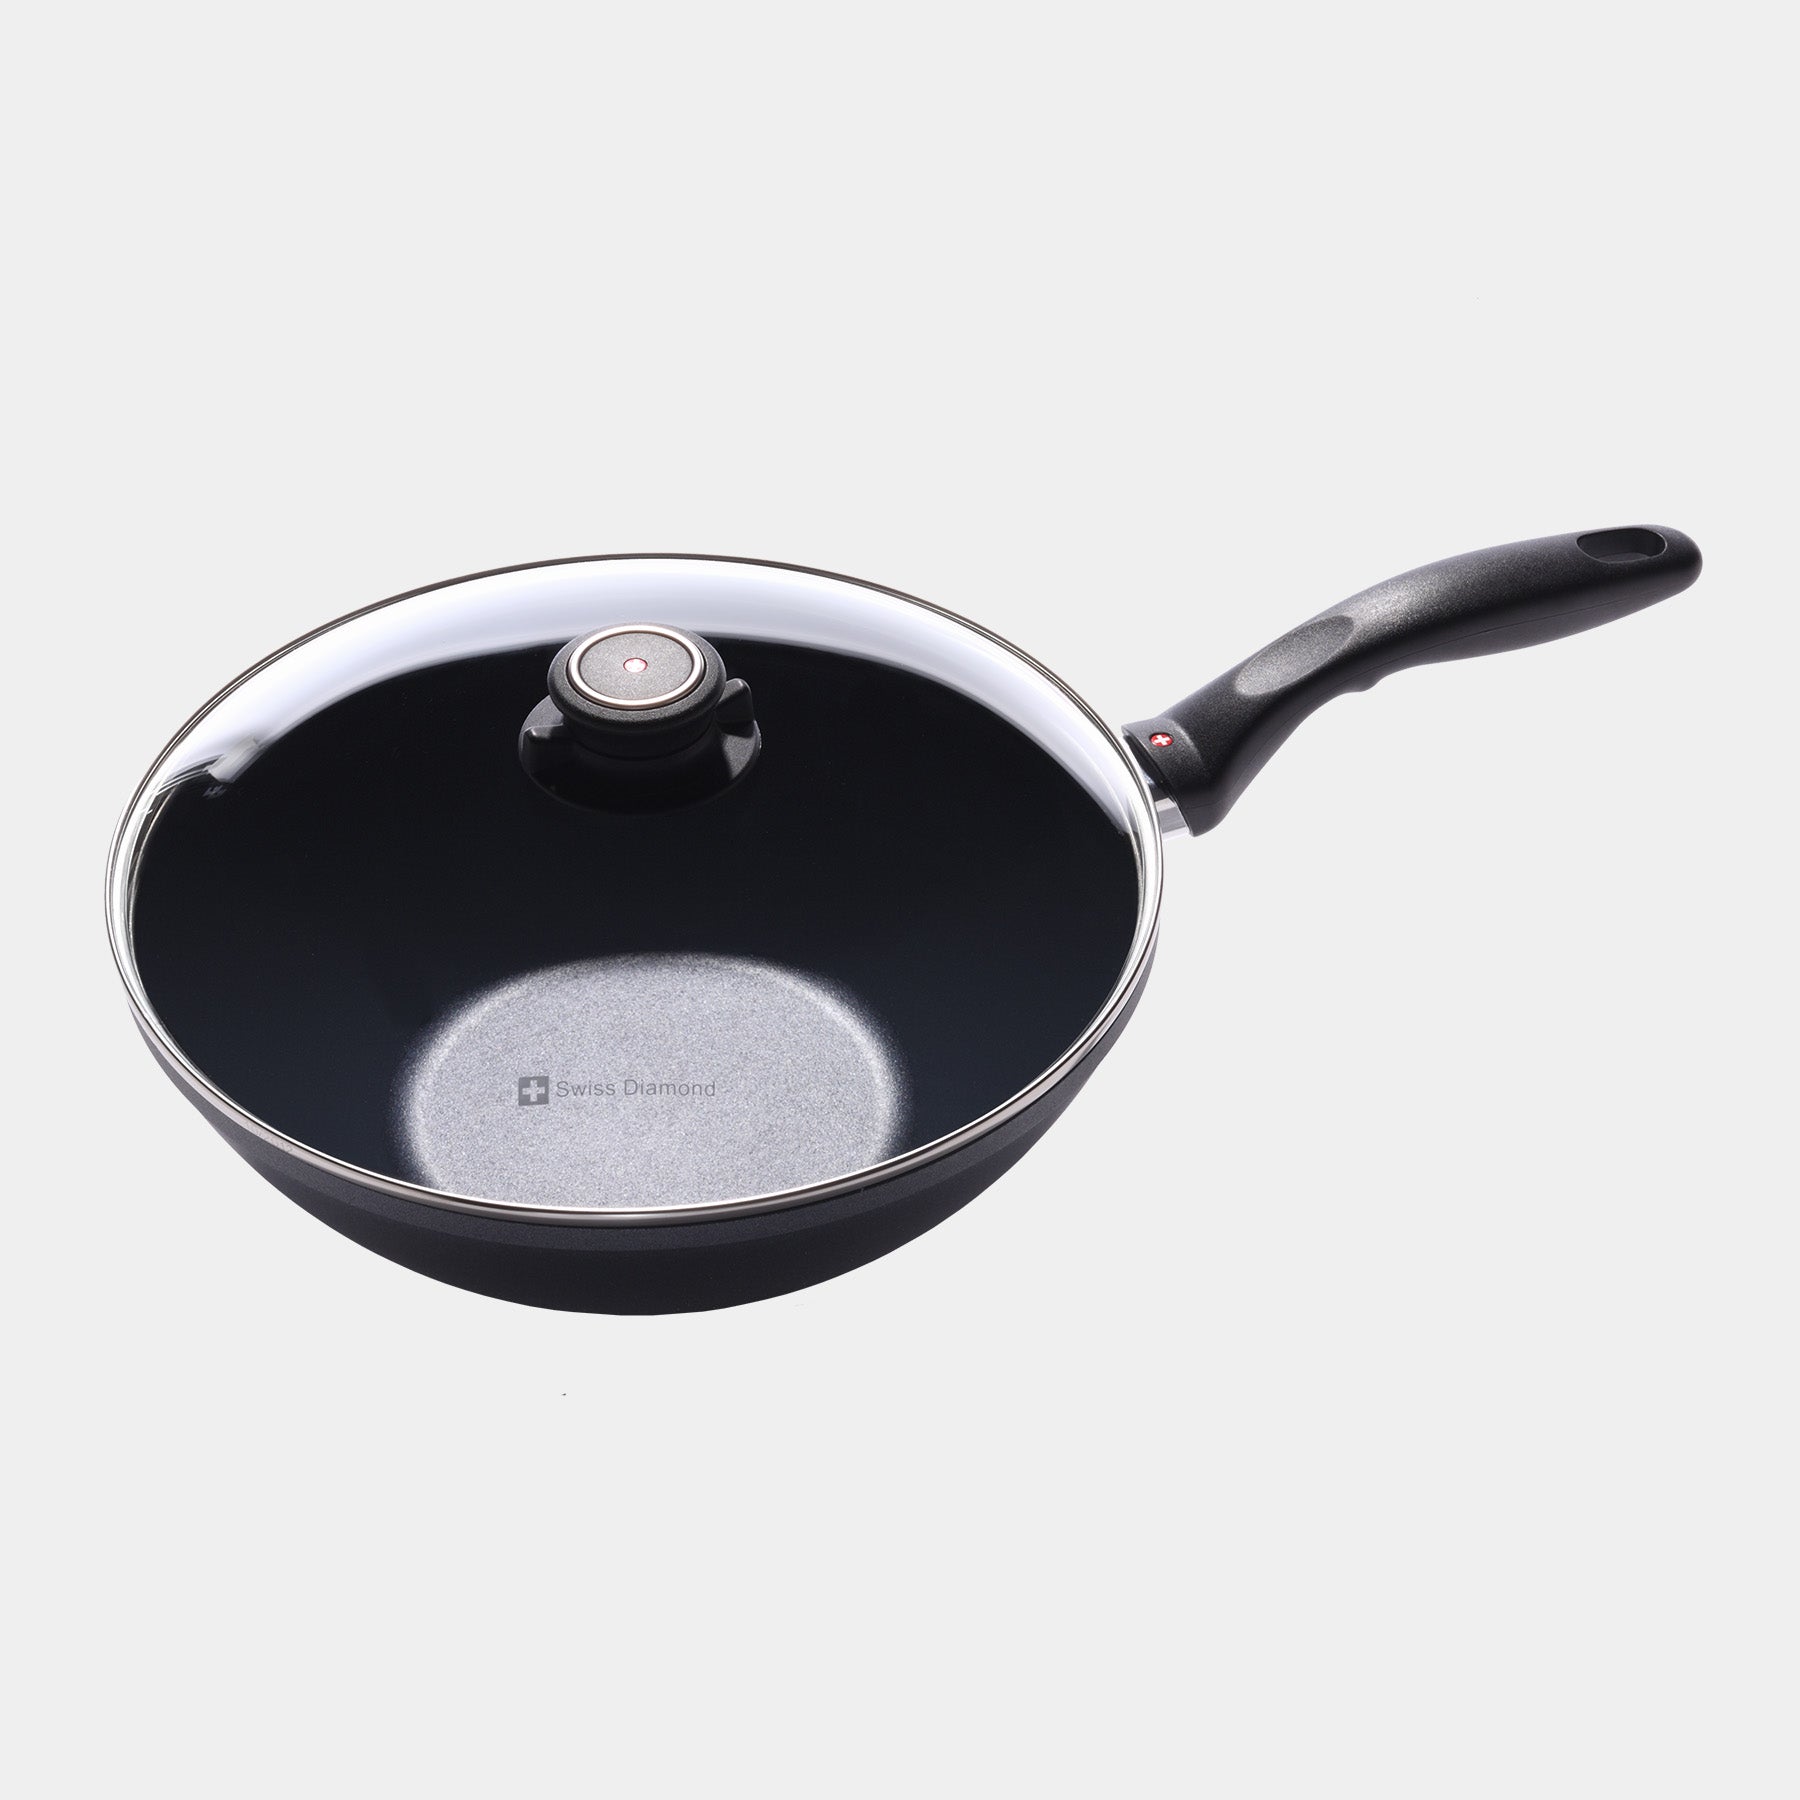 HD Nonstick 11" Wok with Glass Lid - Induction